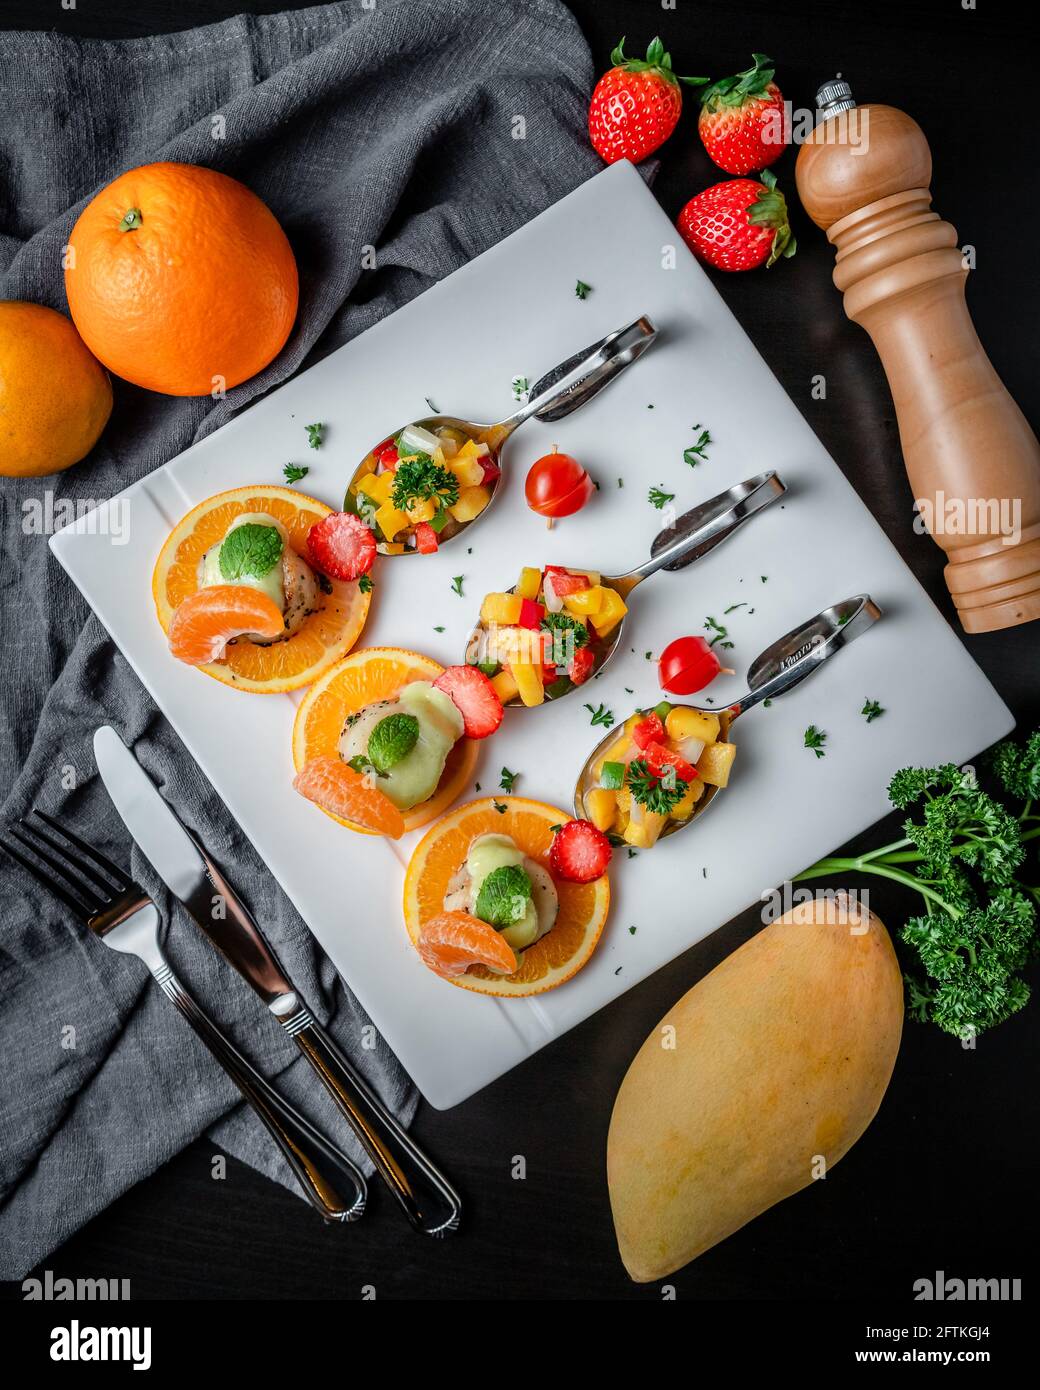 A Dish of Pan-Seared Scallops and Creamy Cheese Sauce Served with Sliced Orange and Fruit Salad on Happy Spoons. Stock Photo